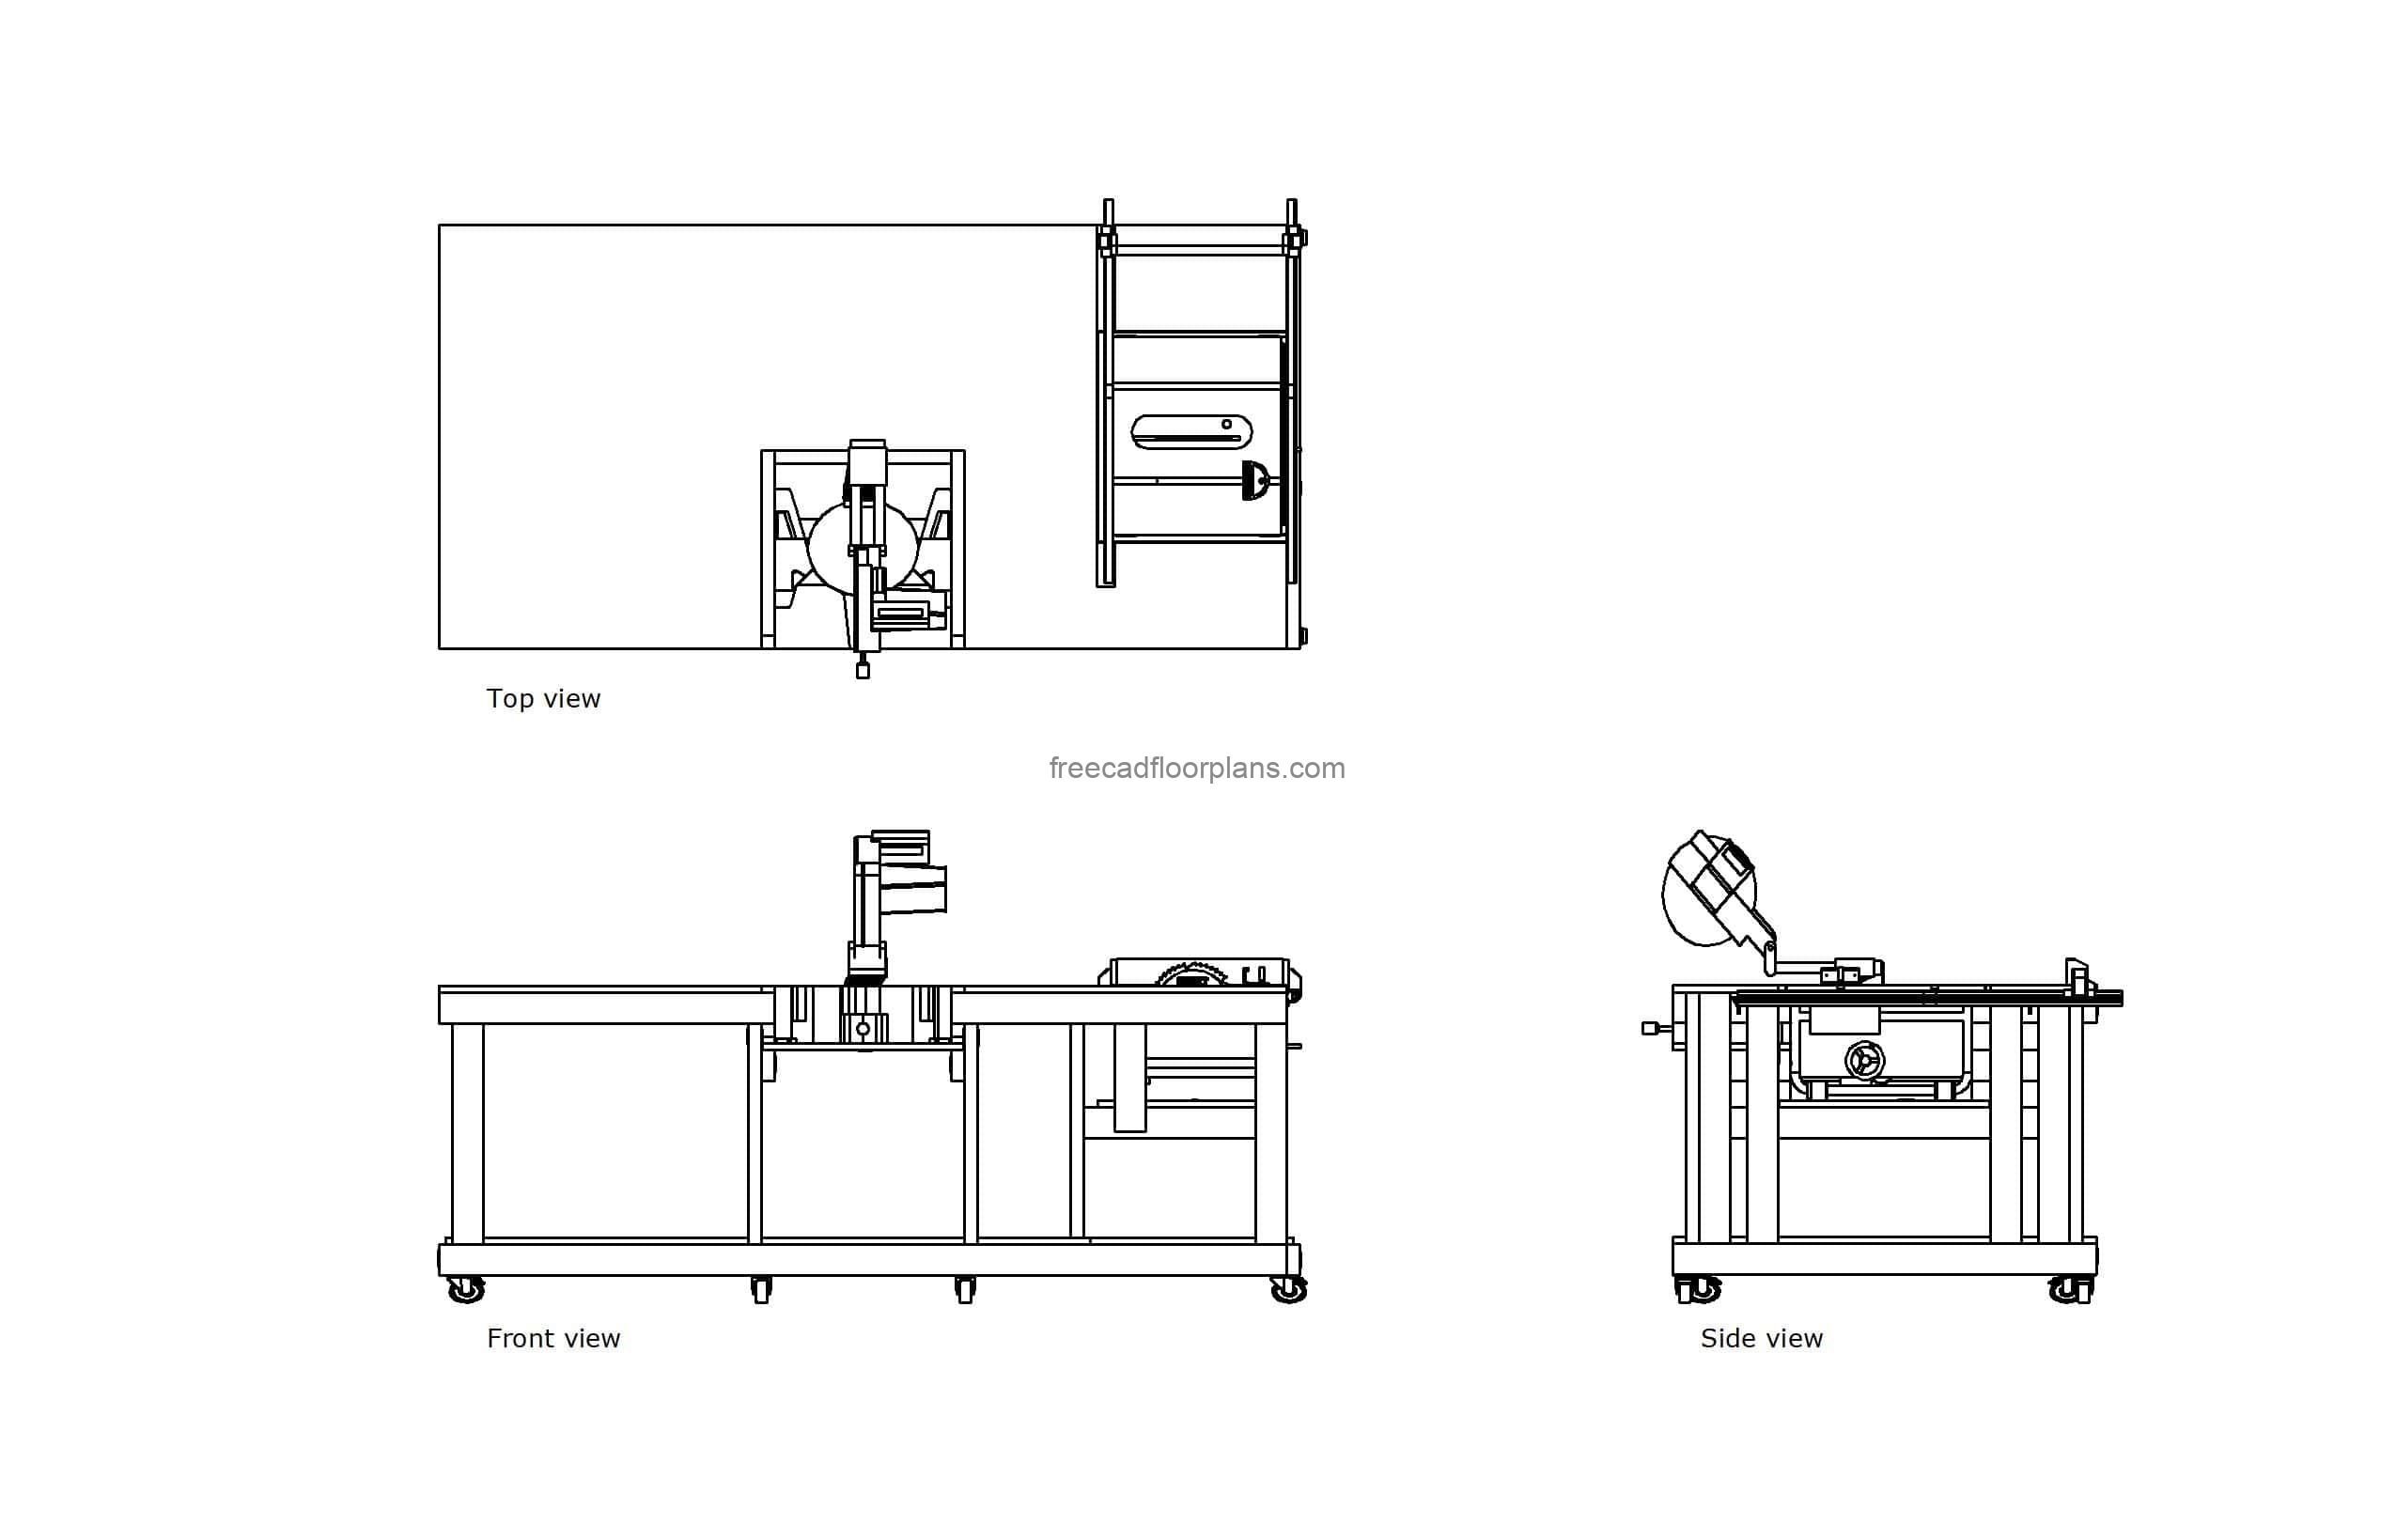 autocad drawing of a workbench with table saw, plan and elevation 2d views, dwg file free for download